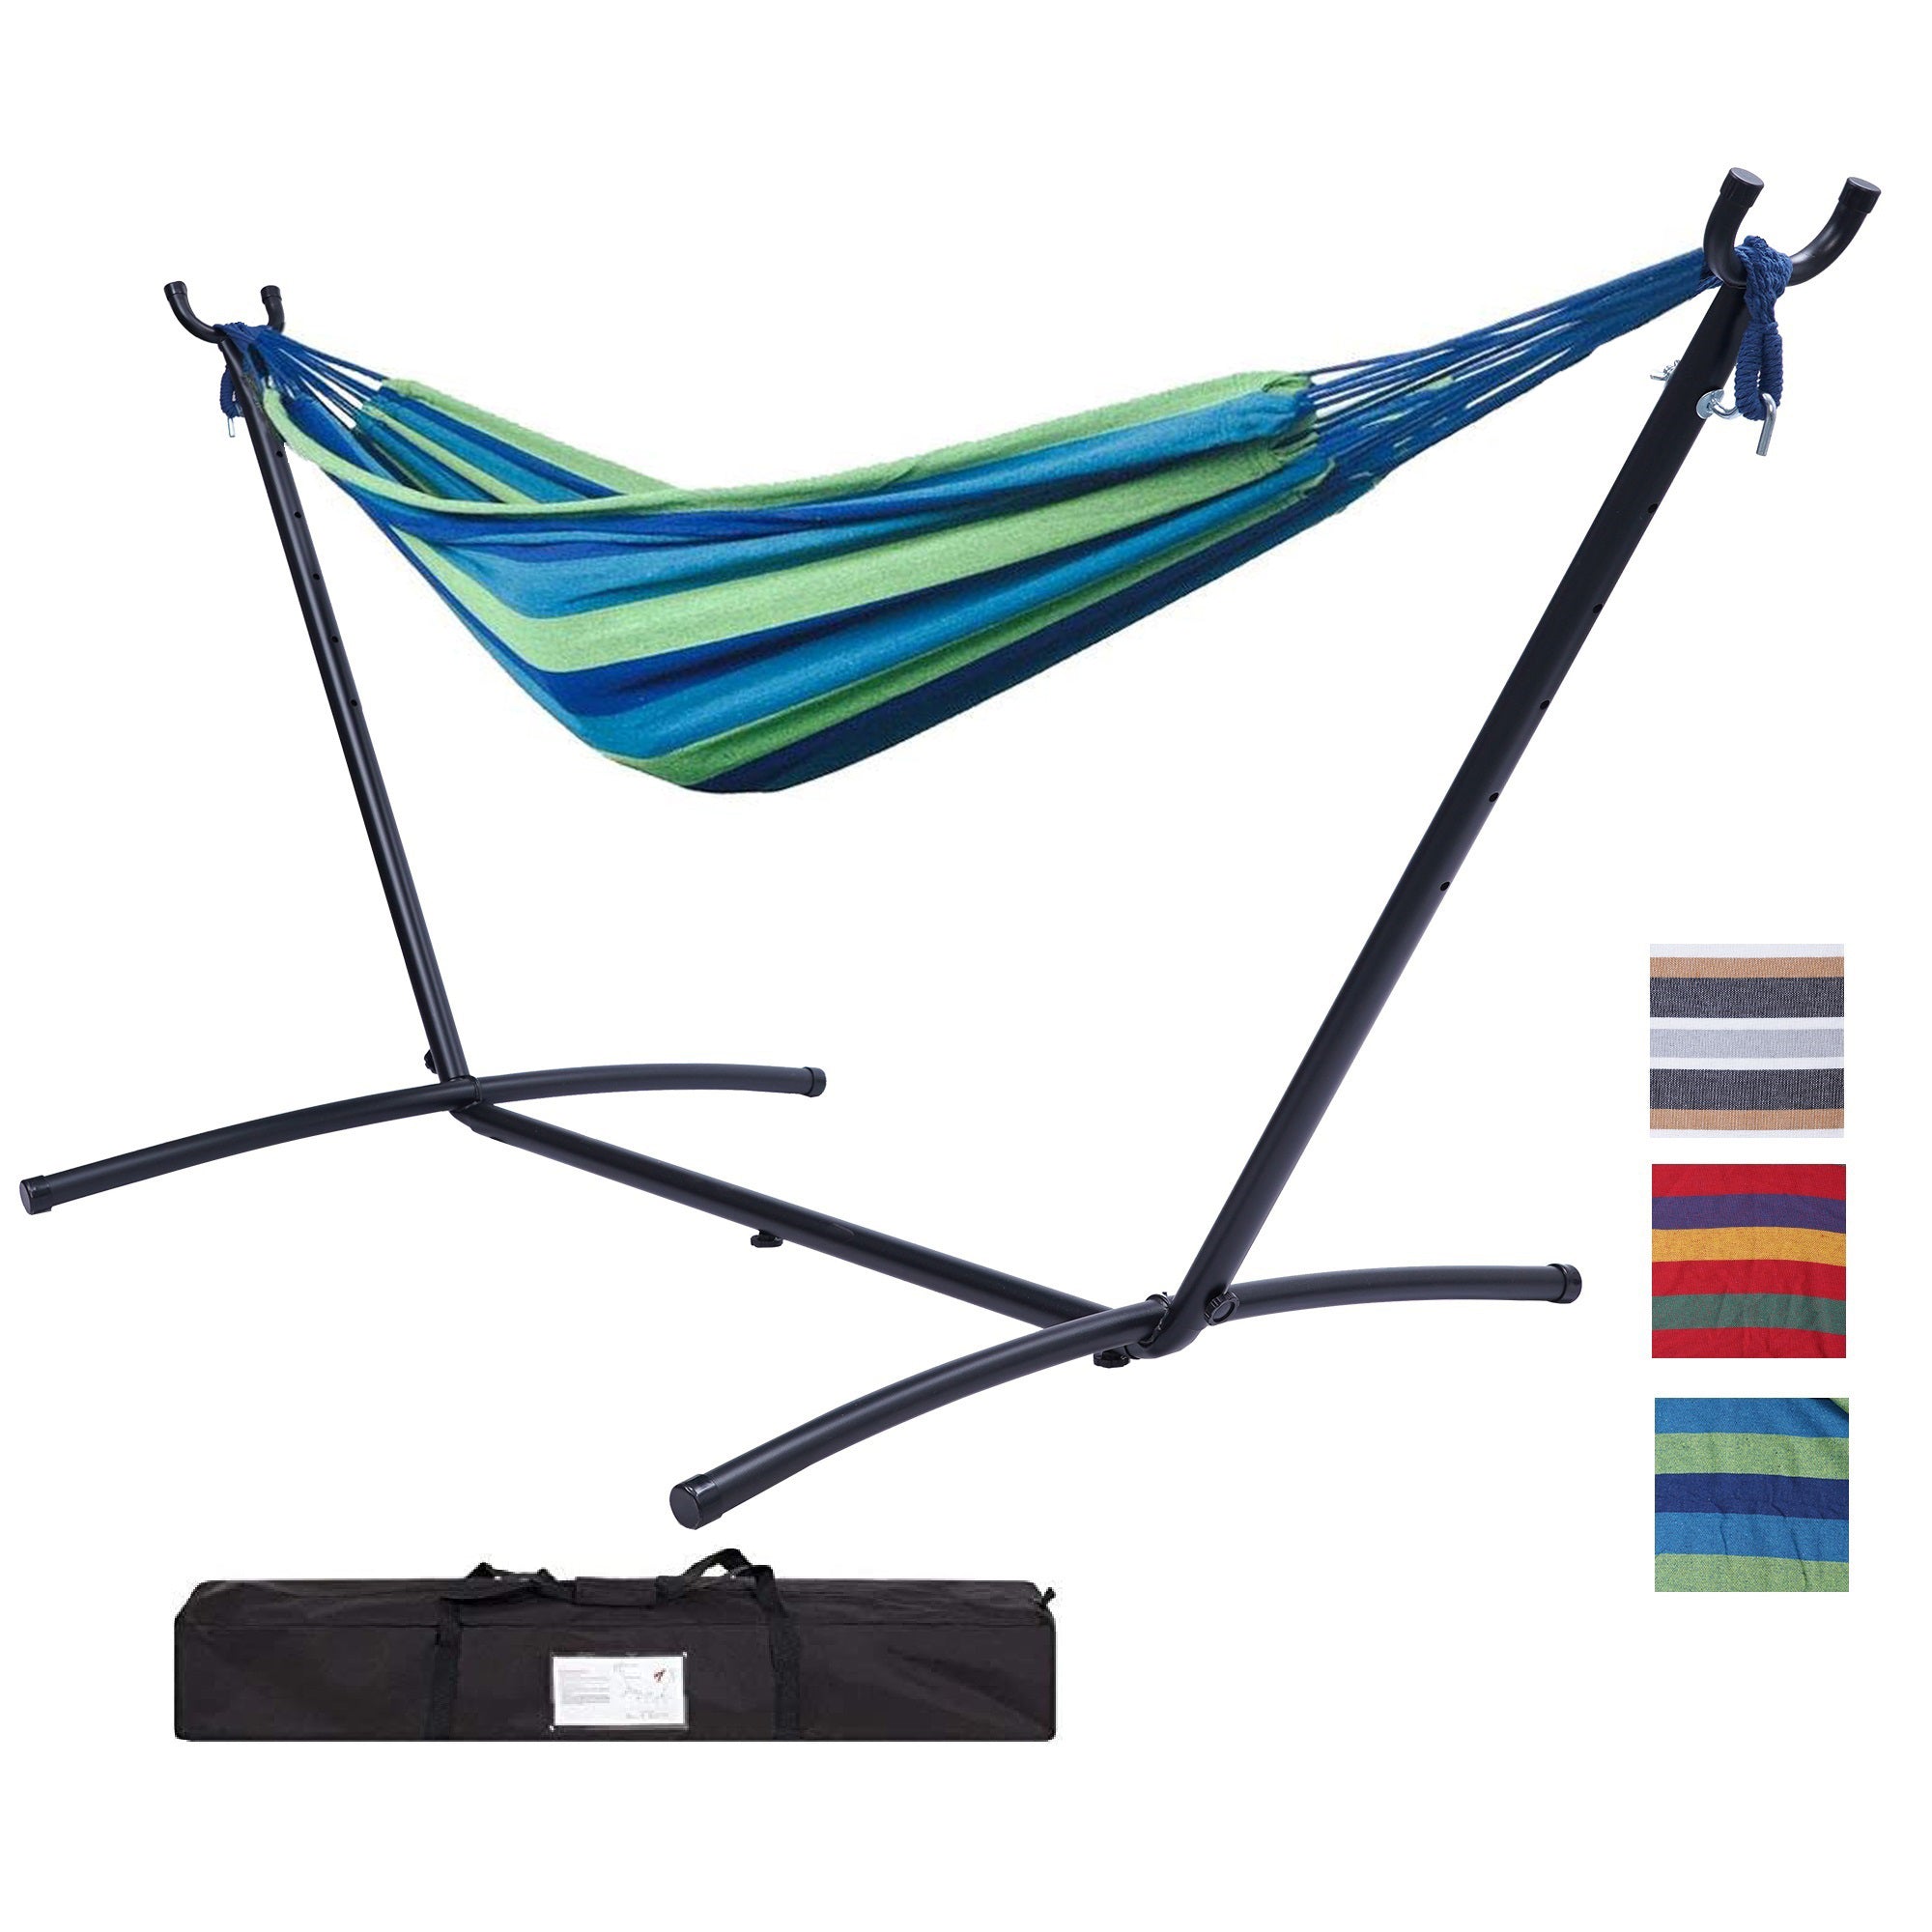 Outdoor Free Standing Classic Colorful Hammock with Stand，Blue/Green Striped-Boyel Living